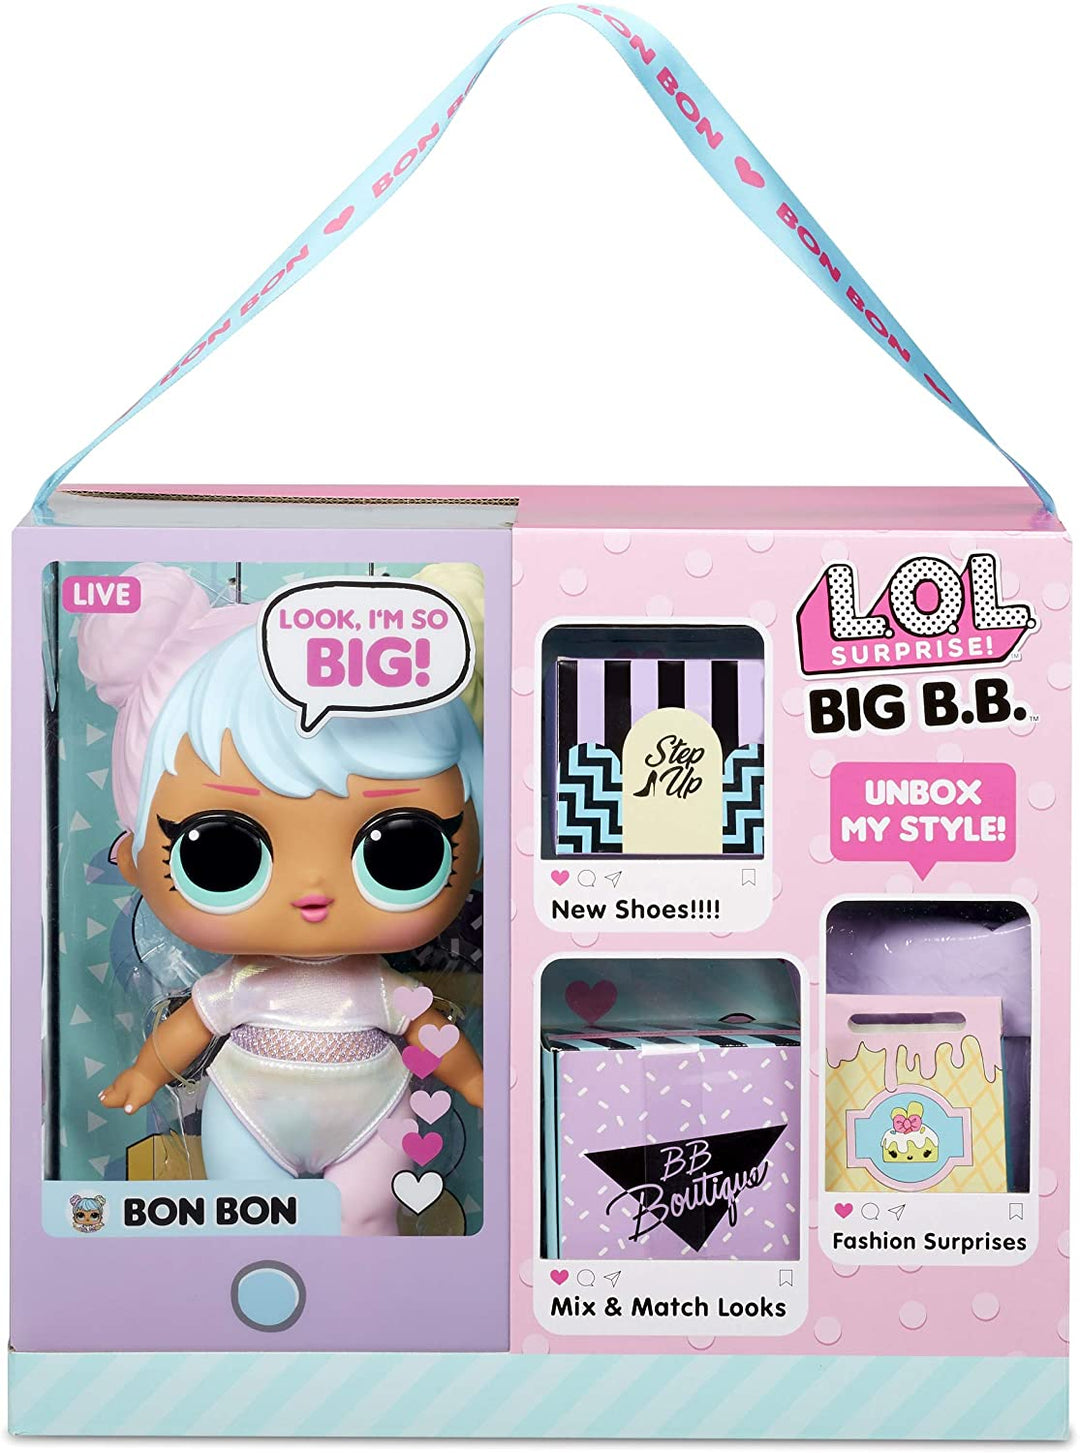 LOL Surprise! Big Baby, Bon Bon Large Doll With Fashion Surprises, Shoes, Doll Clothes And Accessories, Includes Playset Desk, Chair and Backdrop, Collectible Dolls For Boys and Girls Ages 3+